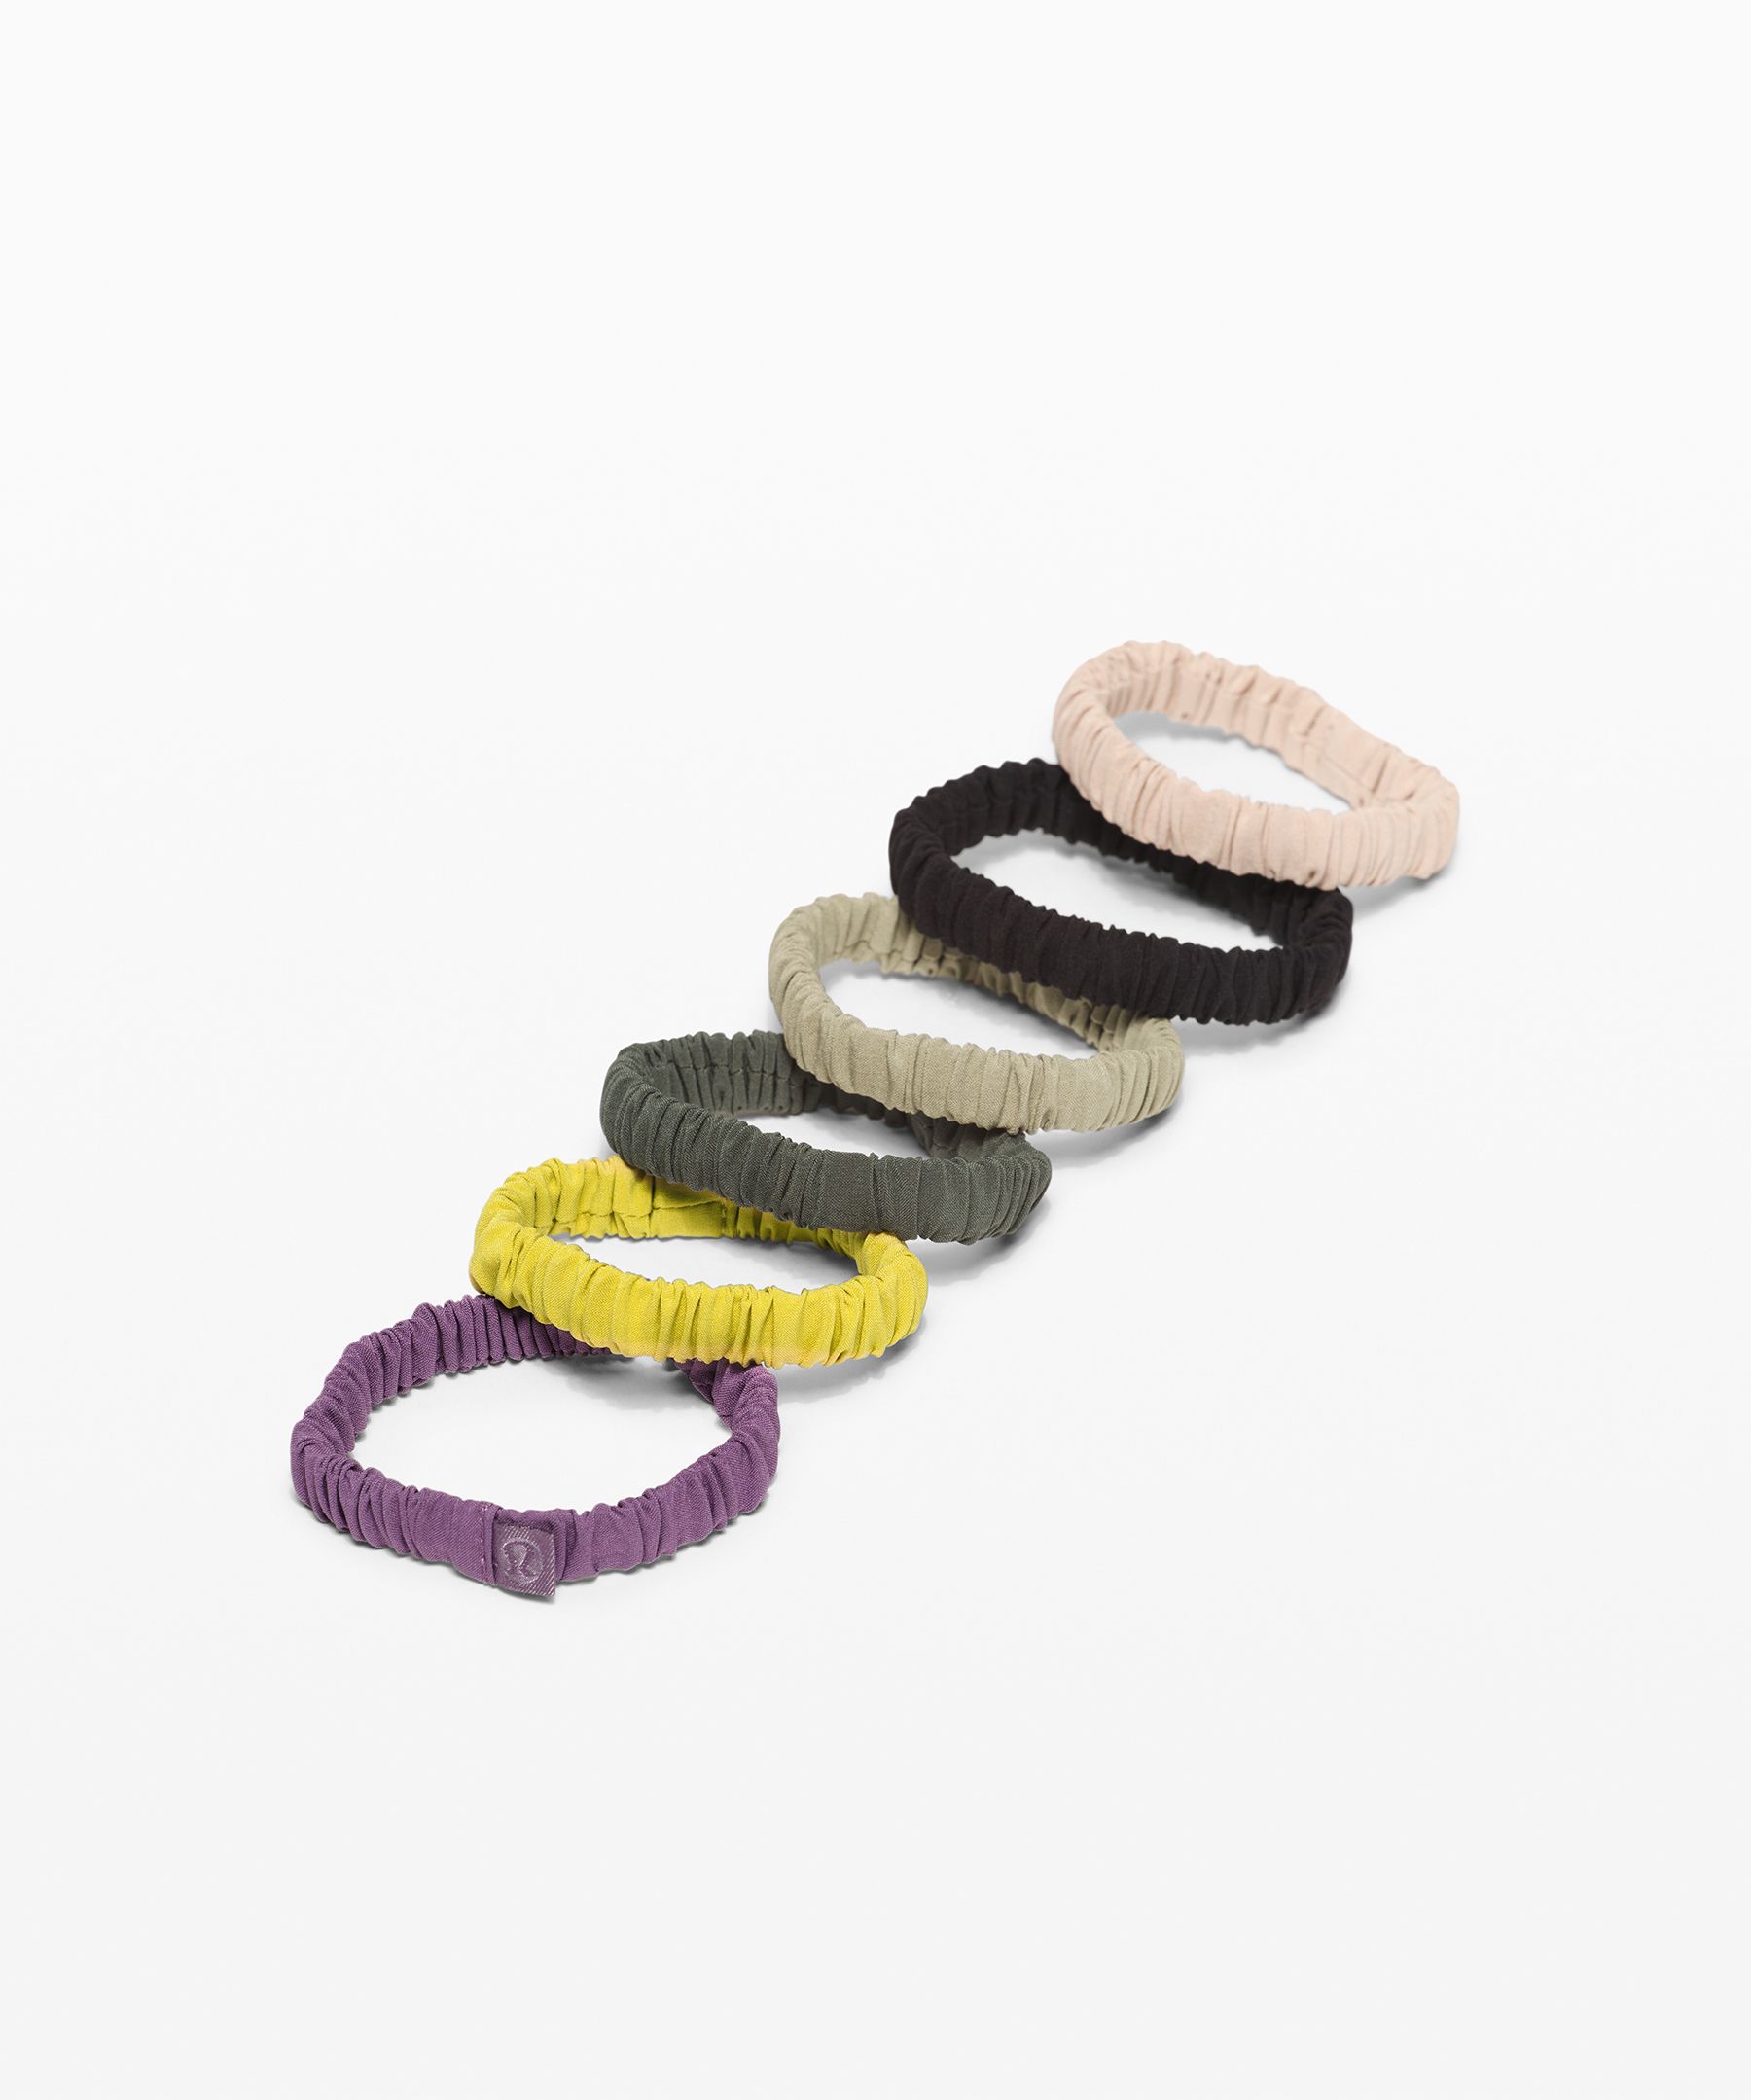 Lululemon Skinny Scrunchie 6 Pack In Grape Mauve/yellow Pear/smoked Spruce